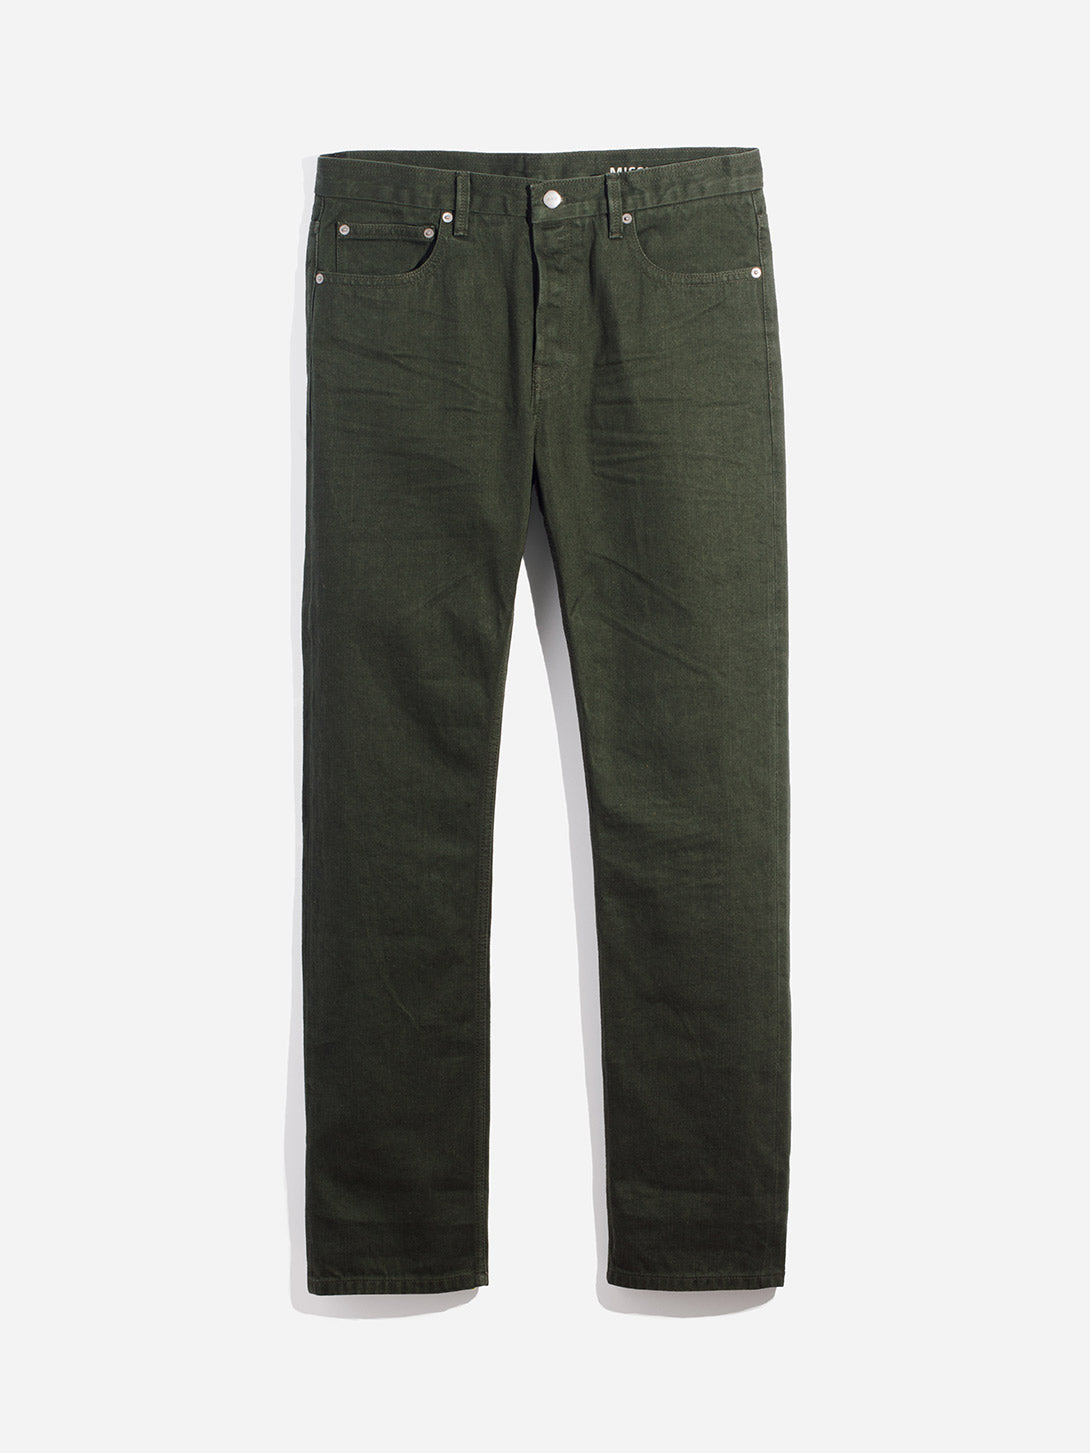 OLIVE GREEN jeans for men denim missions ons clothing